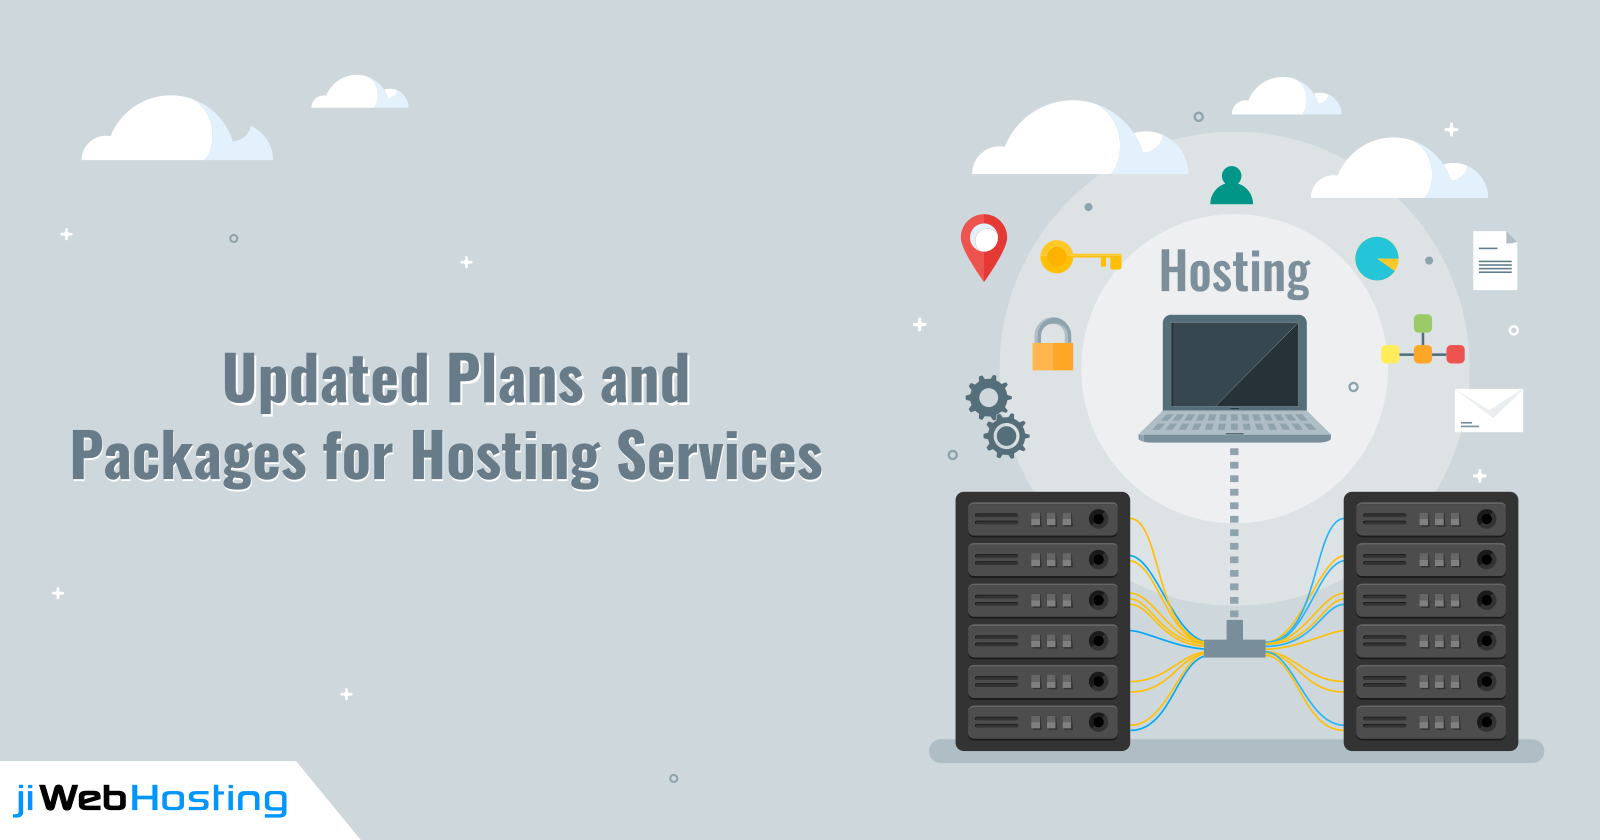 Know the Updated Plans and Packages of Hosting Services